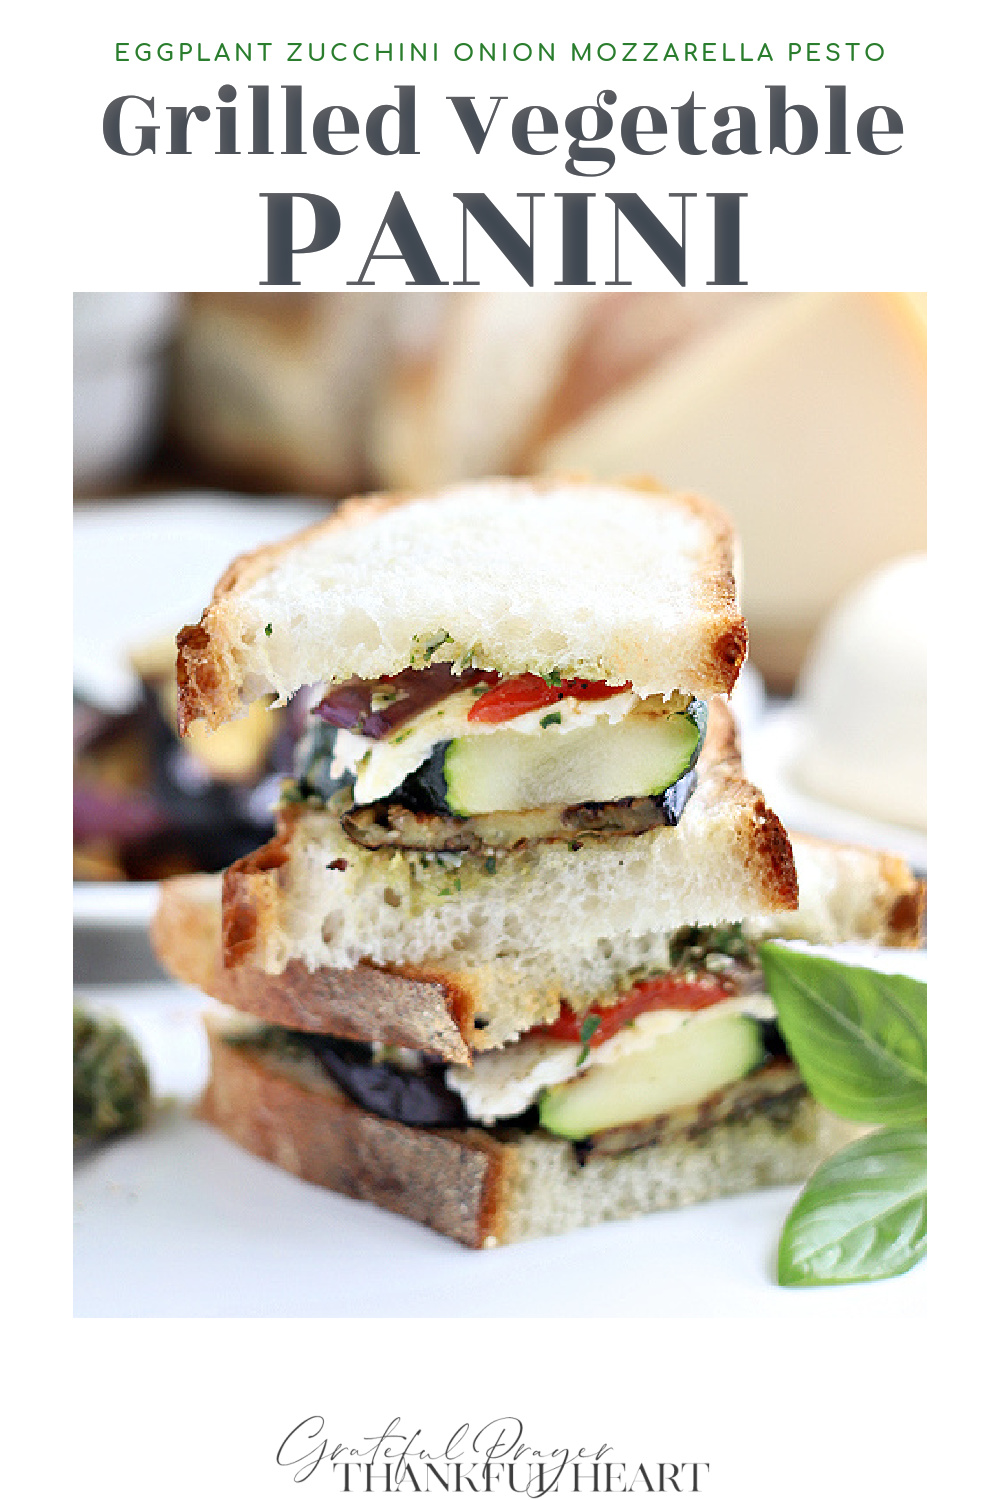 Grilled vegetable panini with eggplant, zucchini & onions, fresh basil pesto, mozzarella & roasted peppers is a tasty, low calorie sandwich.